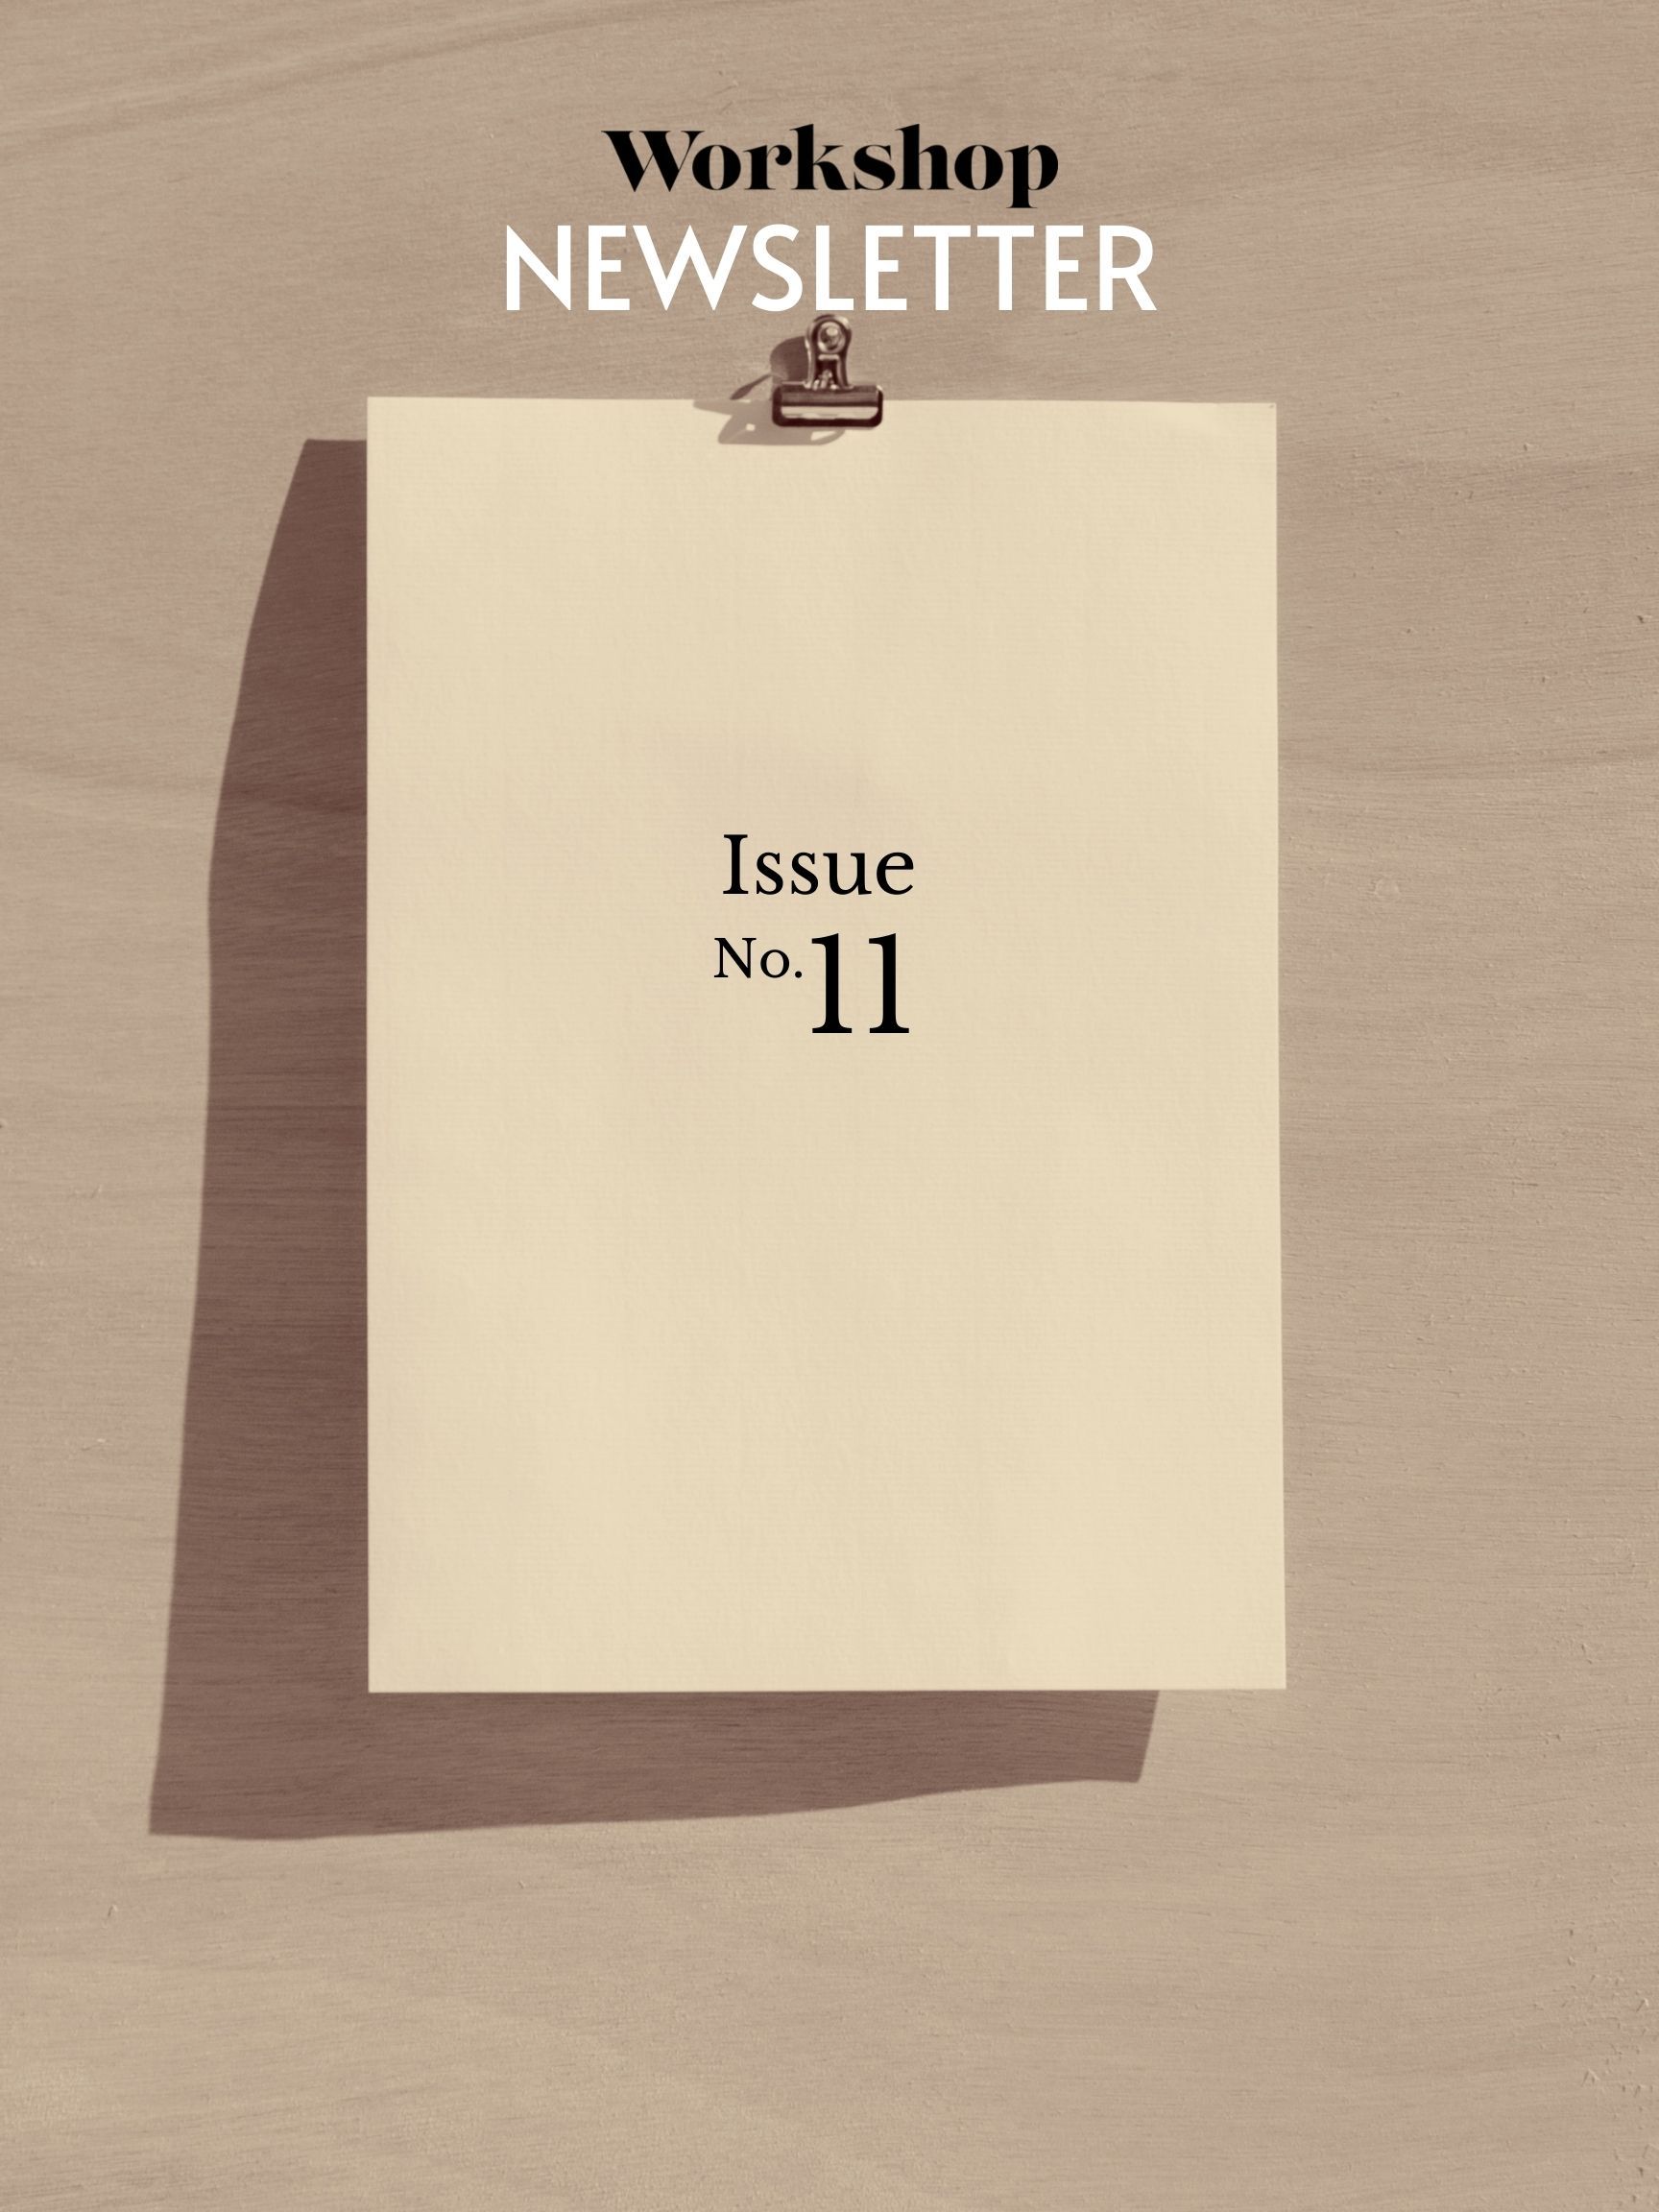 A clipboard on plain background, overlaid in brown. Text reads "Workshop Newsletter Issue No. 11"